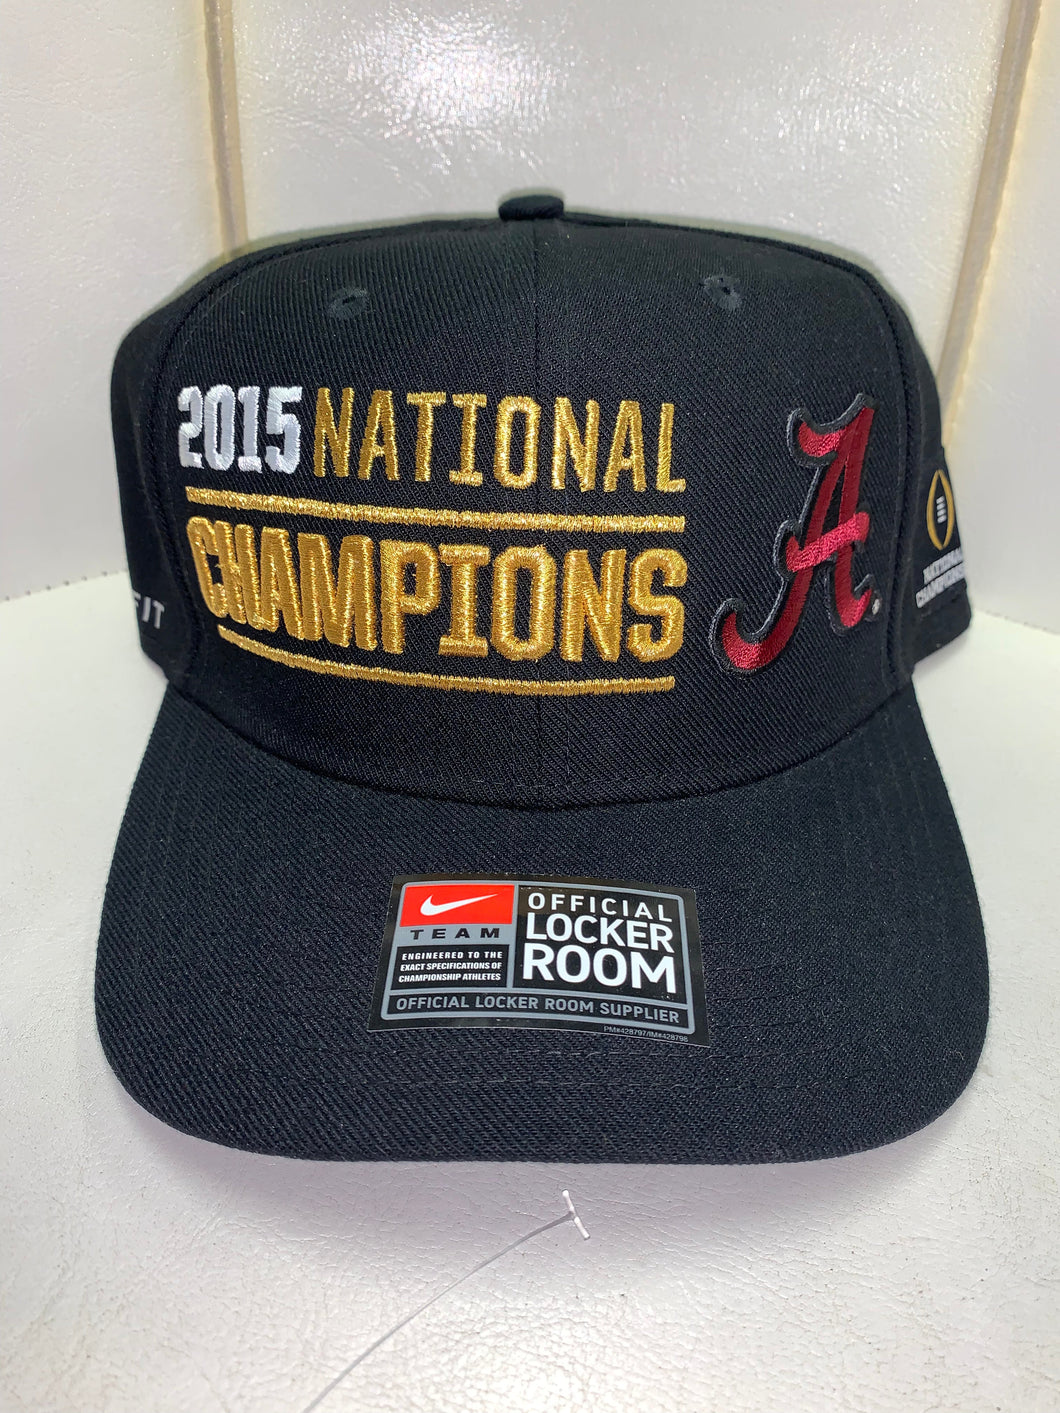 Nike X Alabama 2015 National Champs Official Locker Room Hat